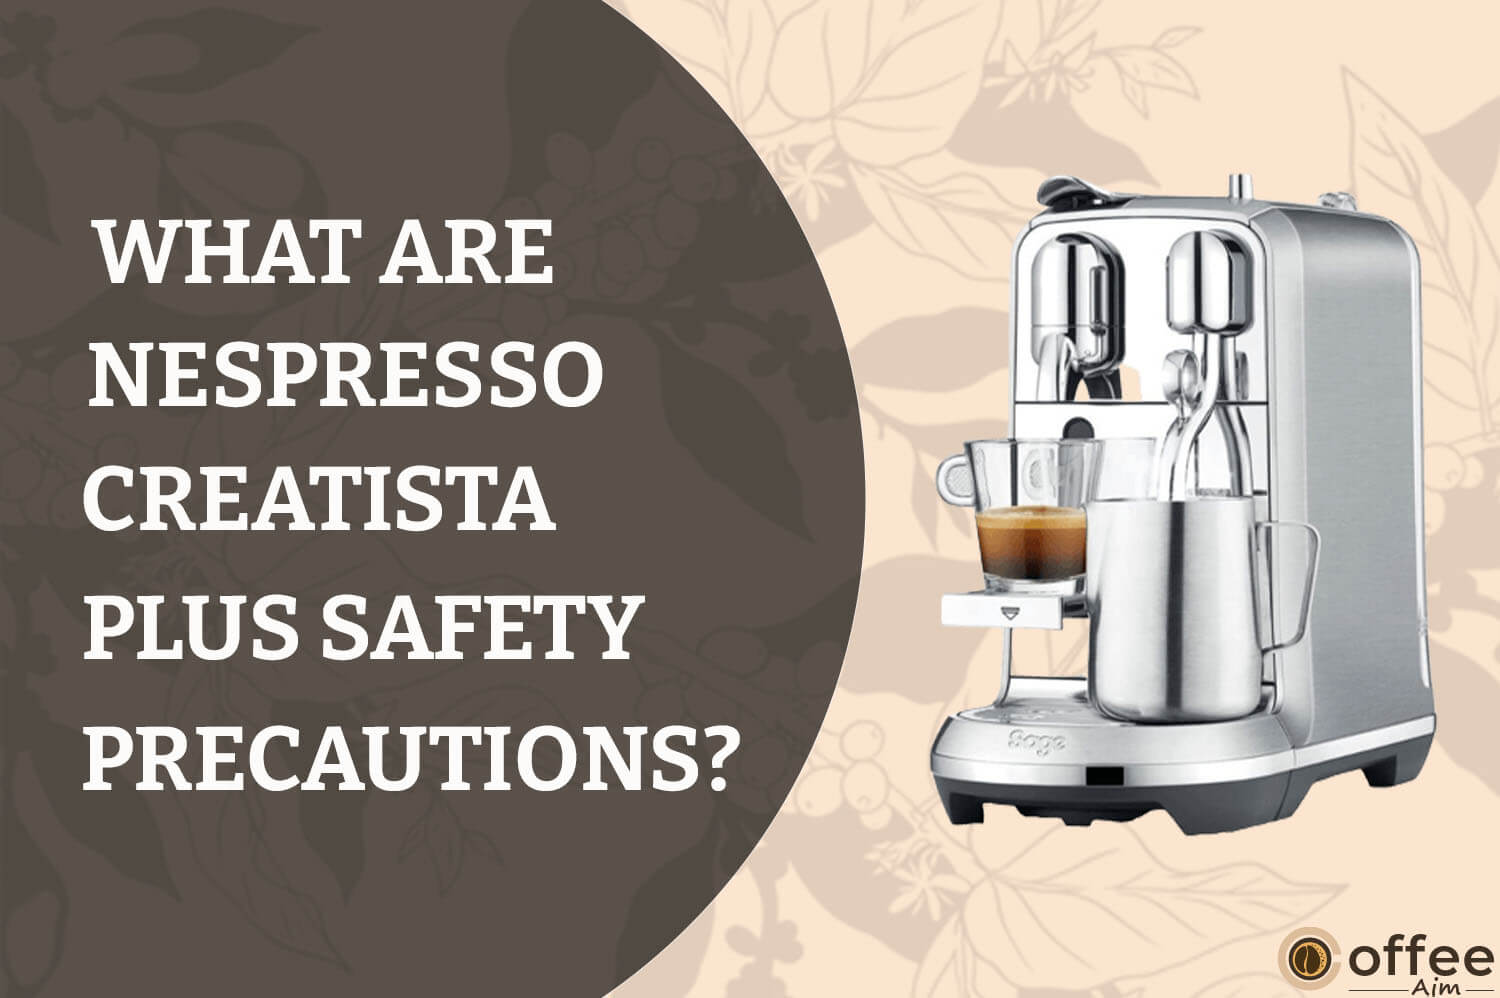 Featured image for the article "What are Nespresso Creatista Plus Safety Precautions"